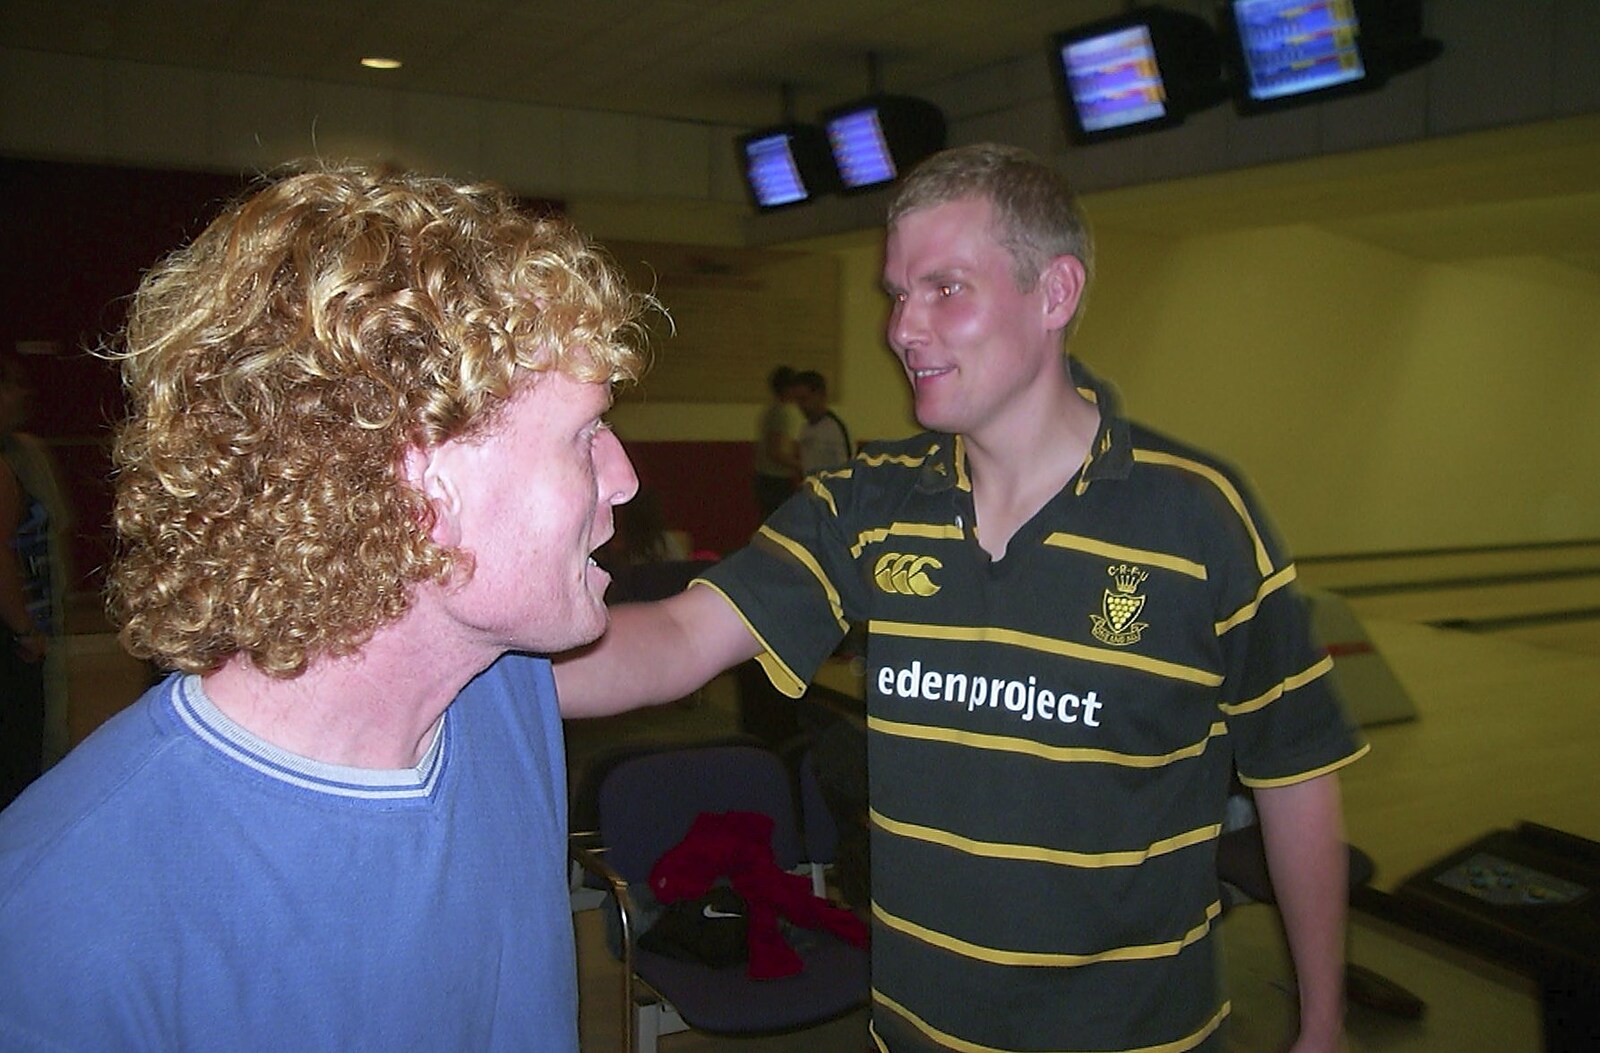 Wavy and Bill from BSCC Bike Rides and Ten-Pin Bowling, Thornham and Norwich - 18th September 2004